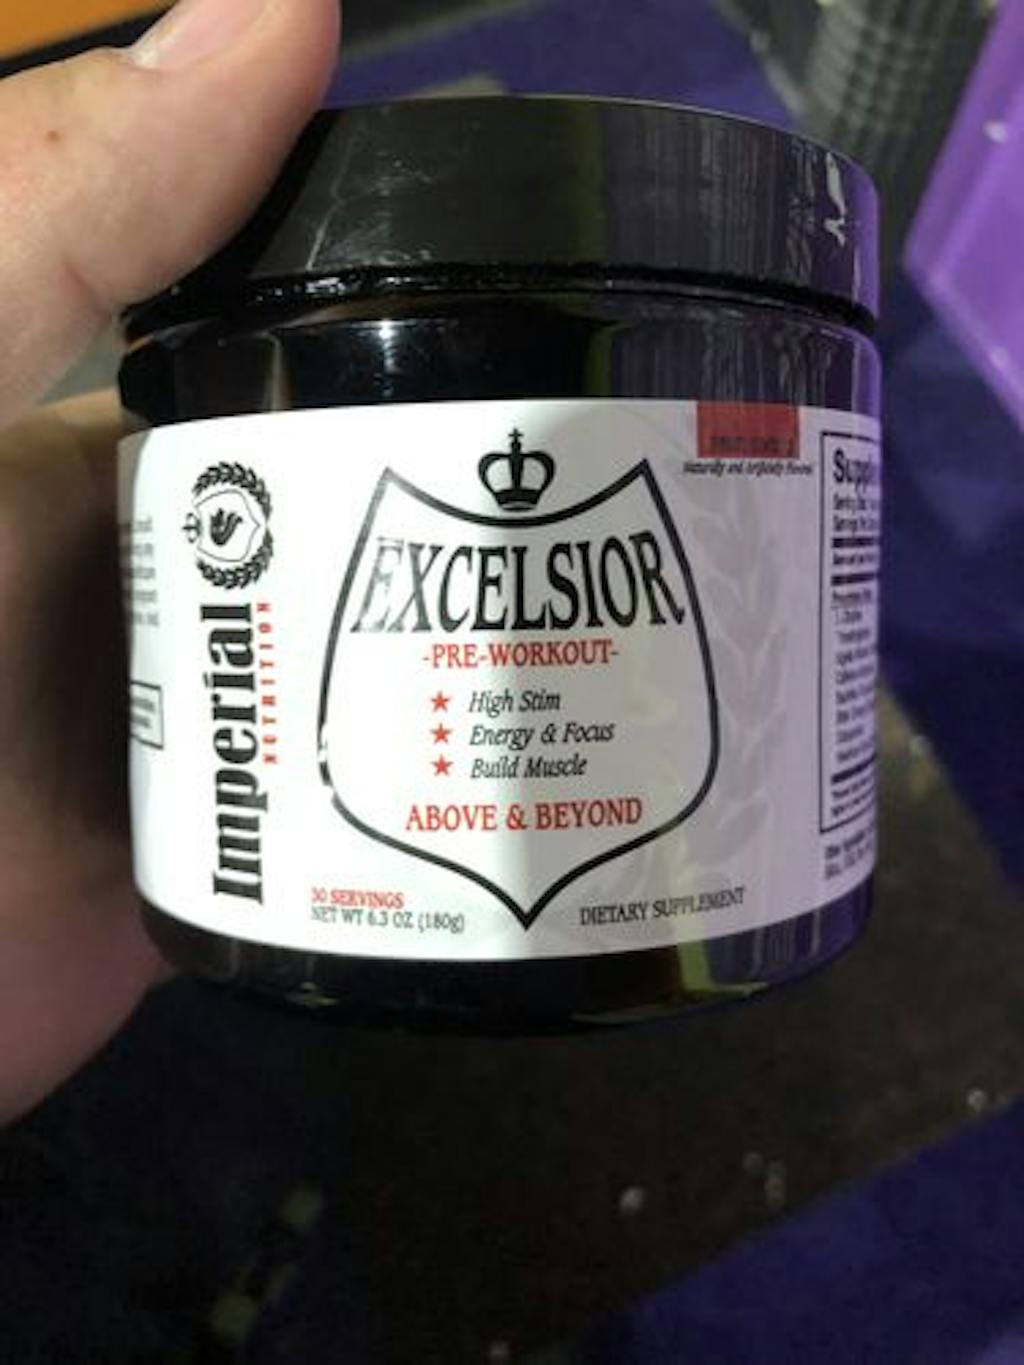 5 Day Excelsior Pre Workout for Build Muscle